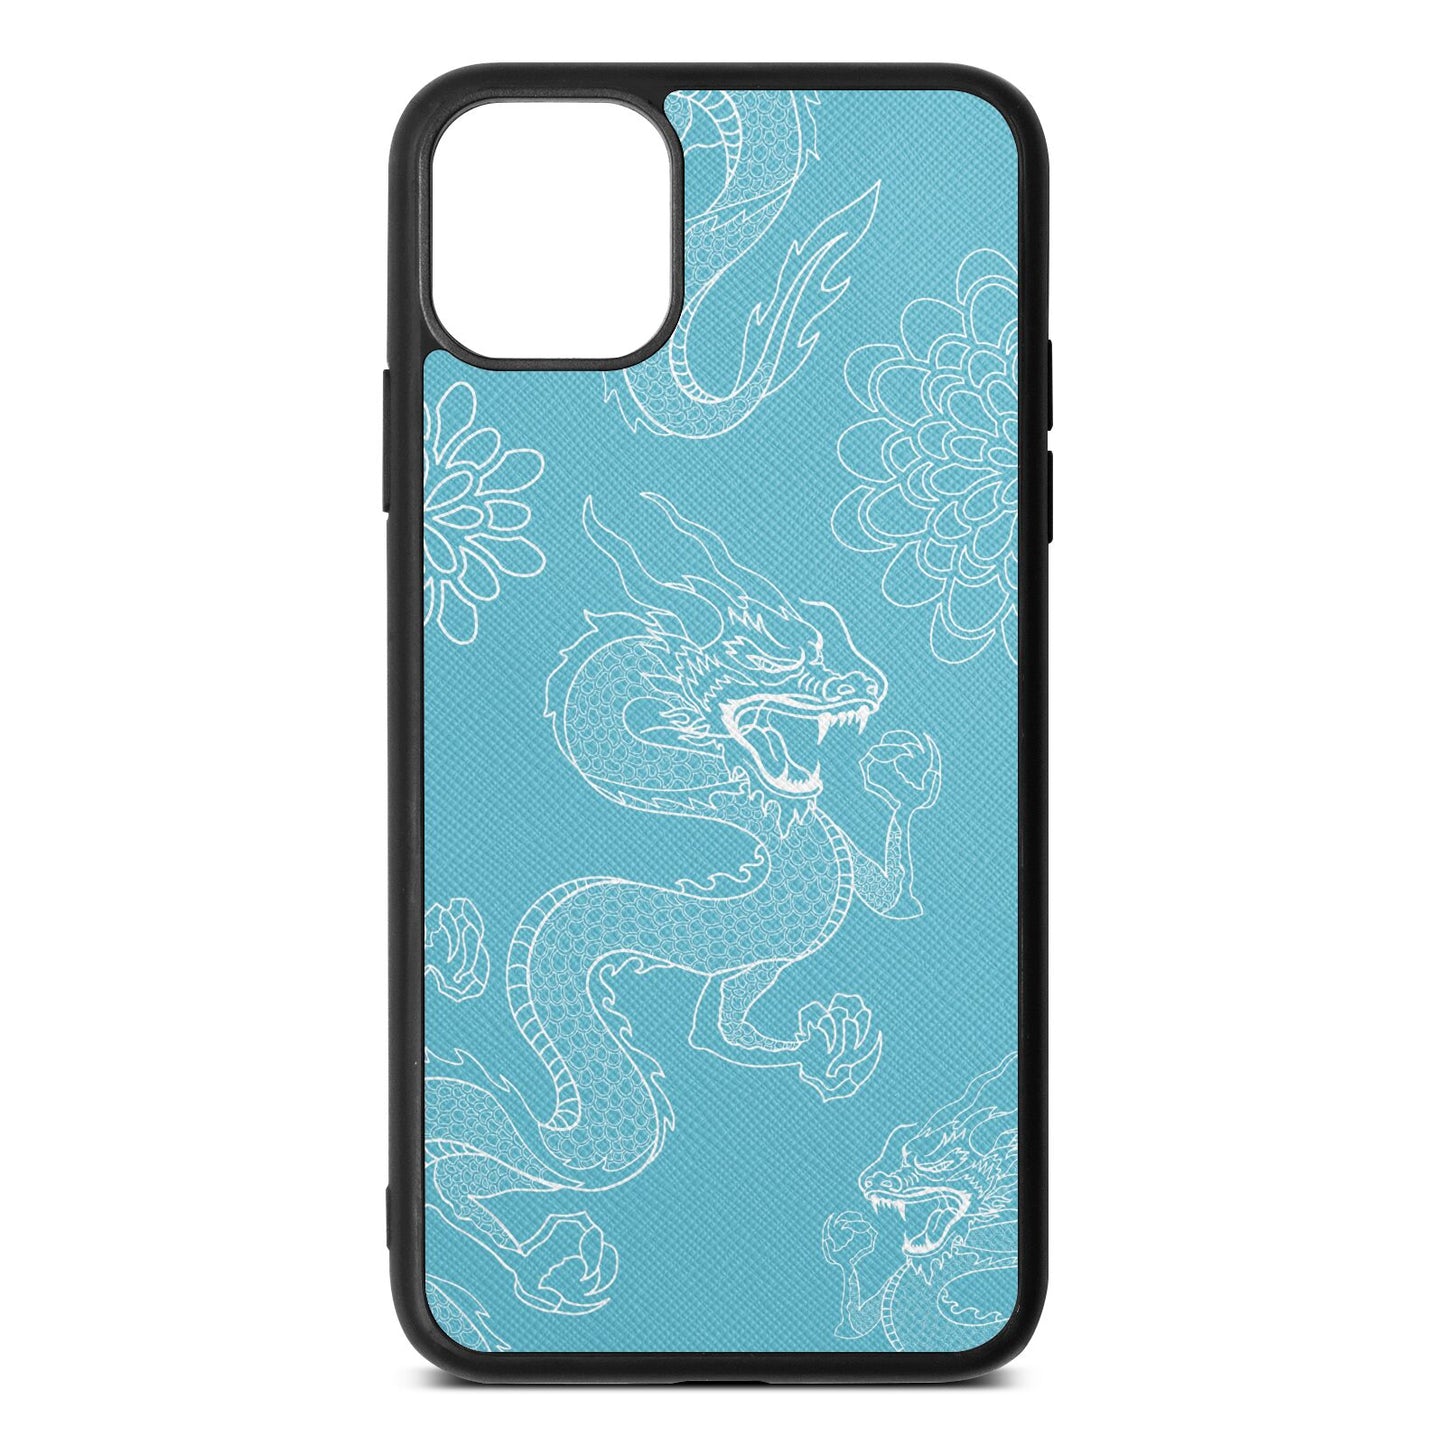 Dragons Sky Saffiano Leather iPhone 11 Pro Max Case